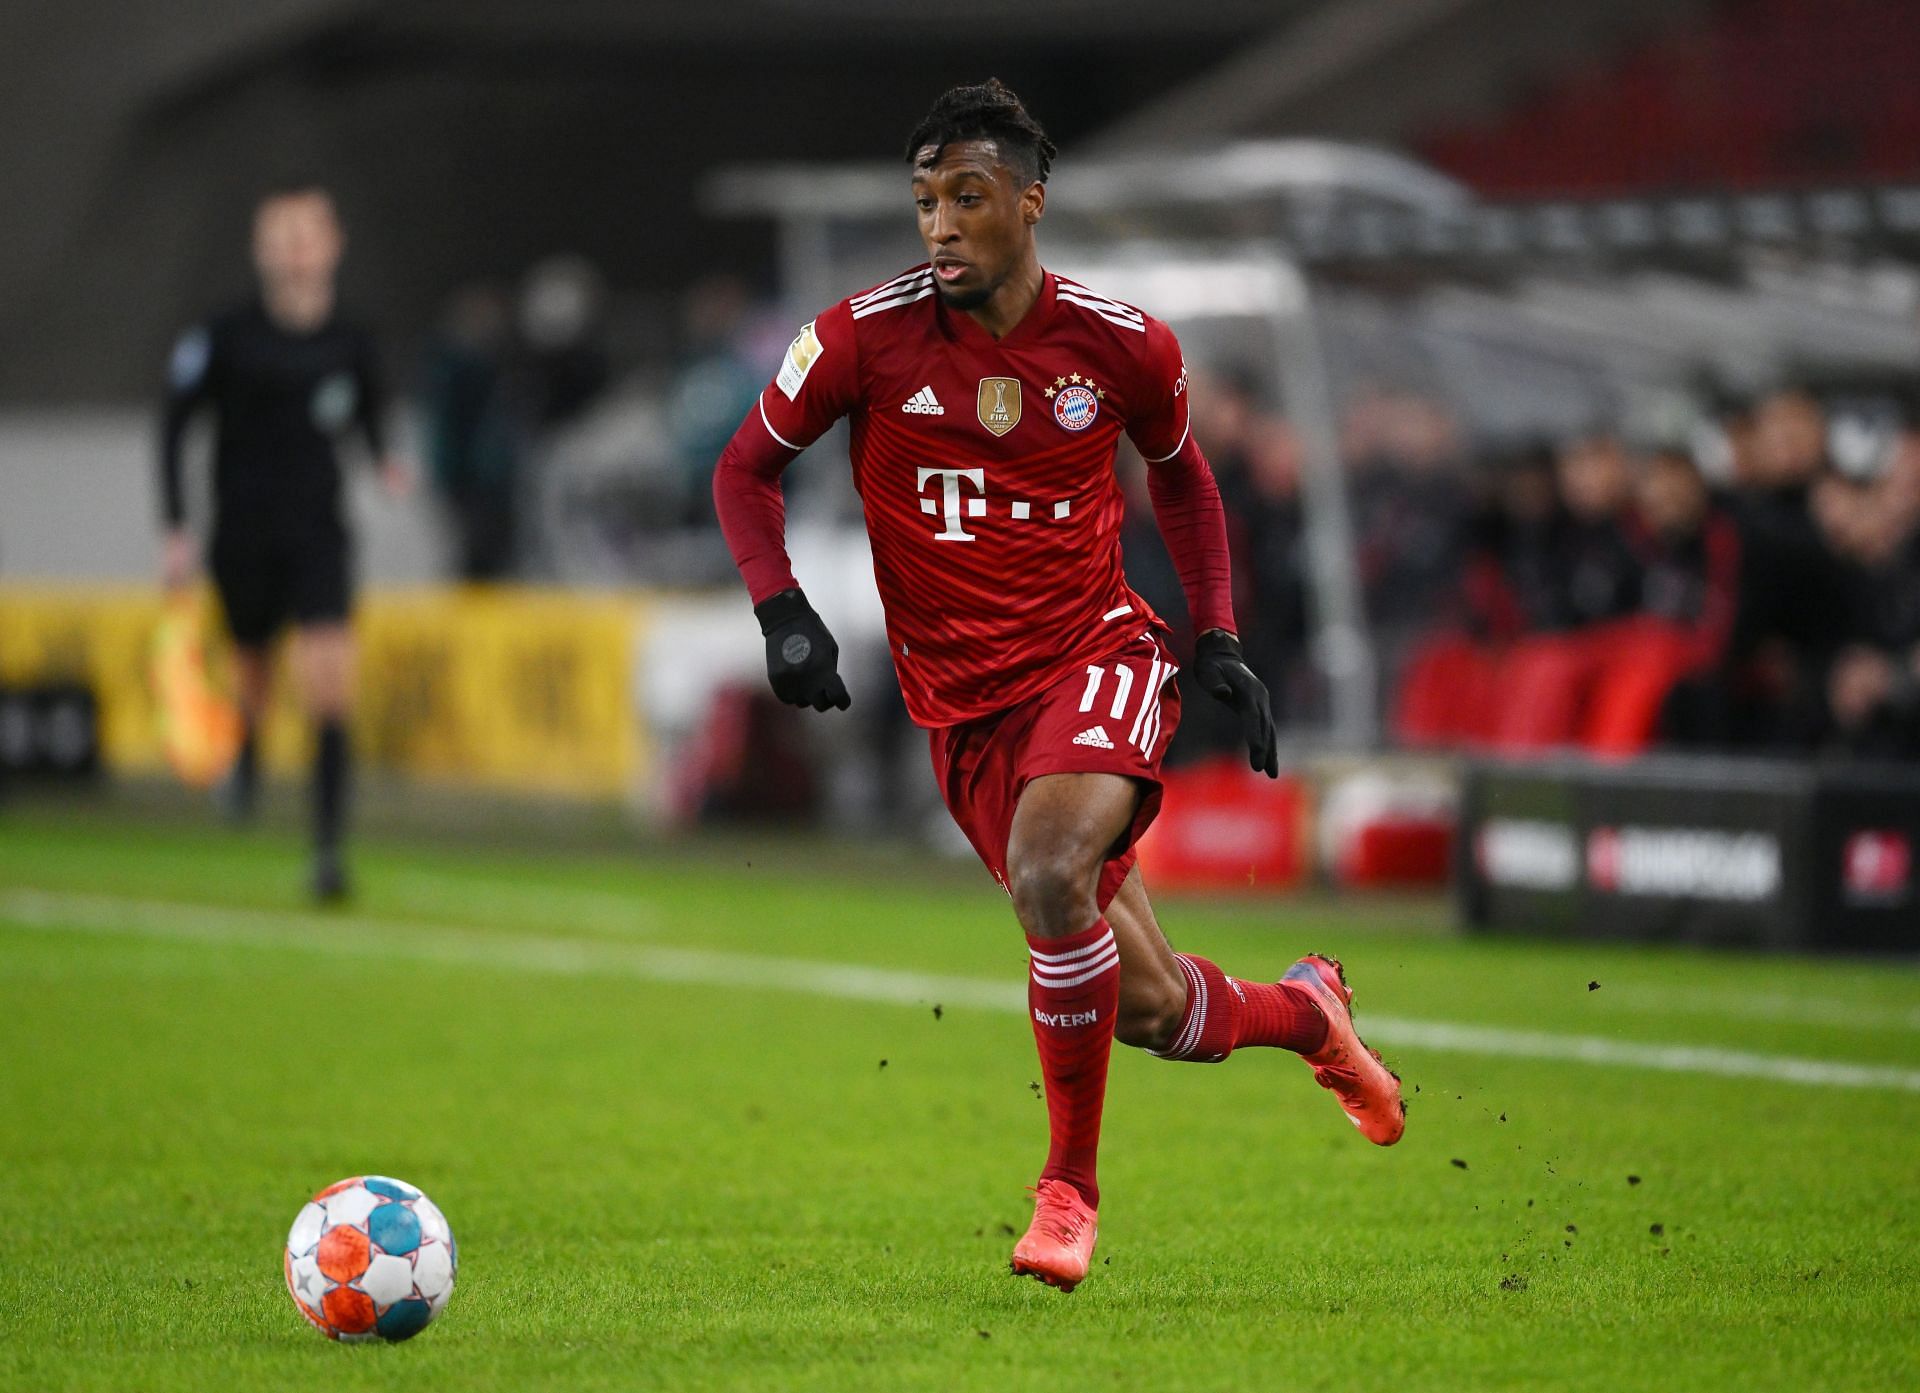 Kingsley Coman has signed a new and improved contract with Bayern Munich.